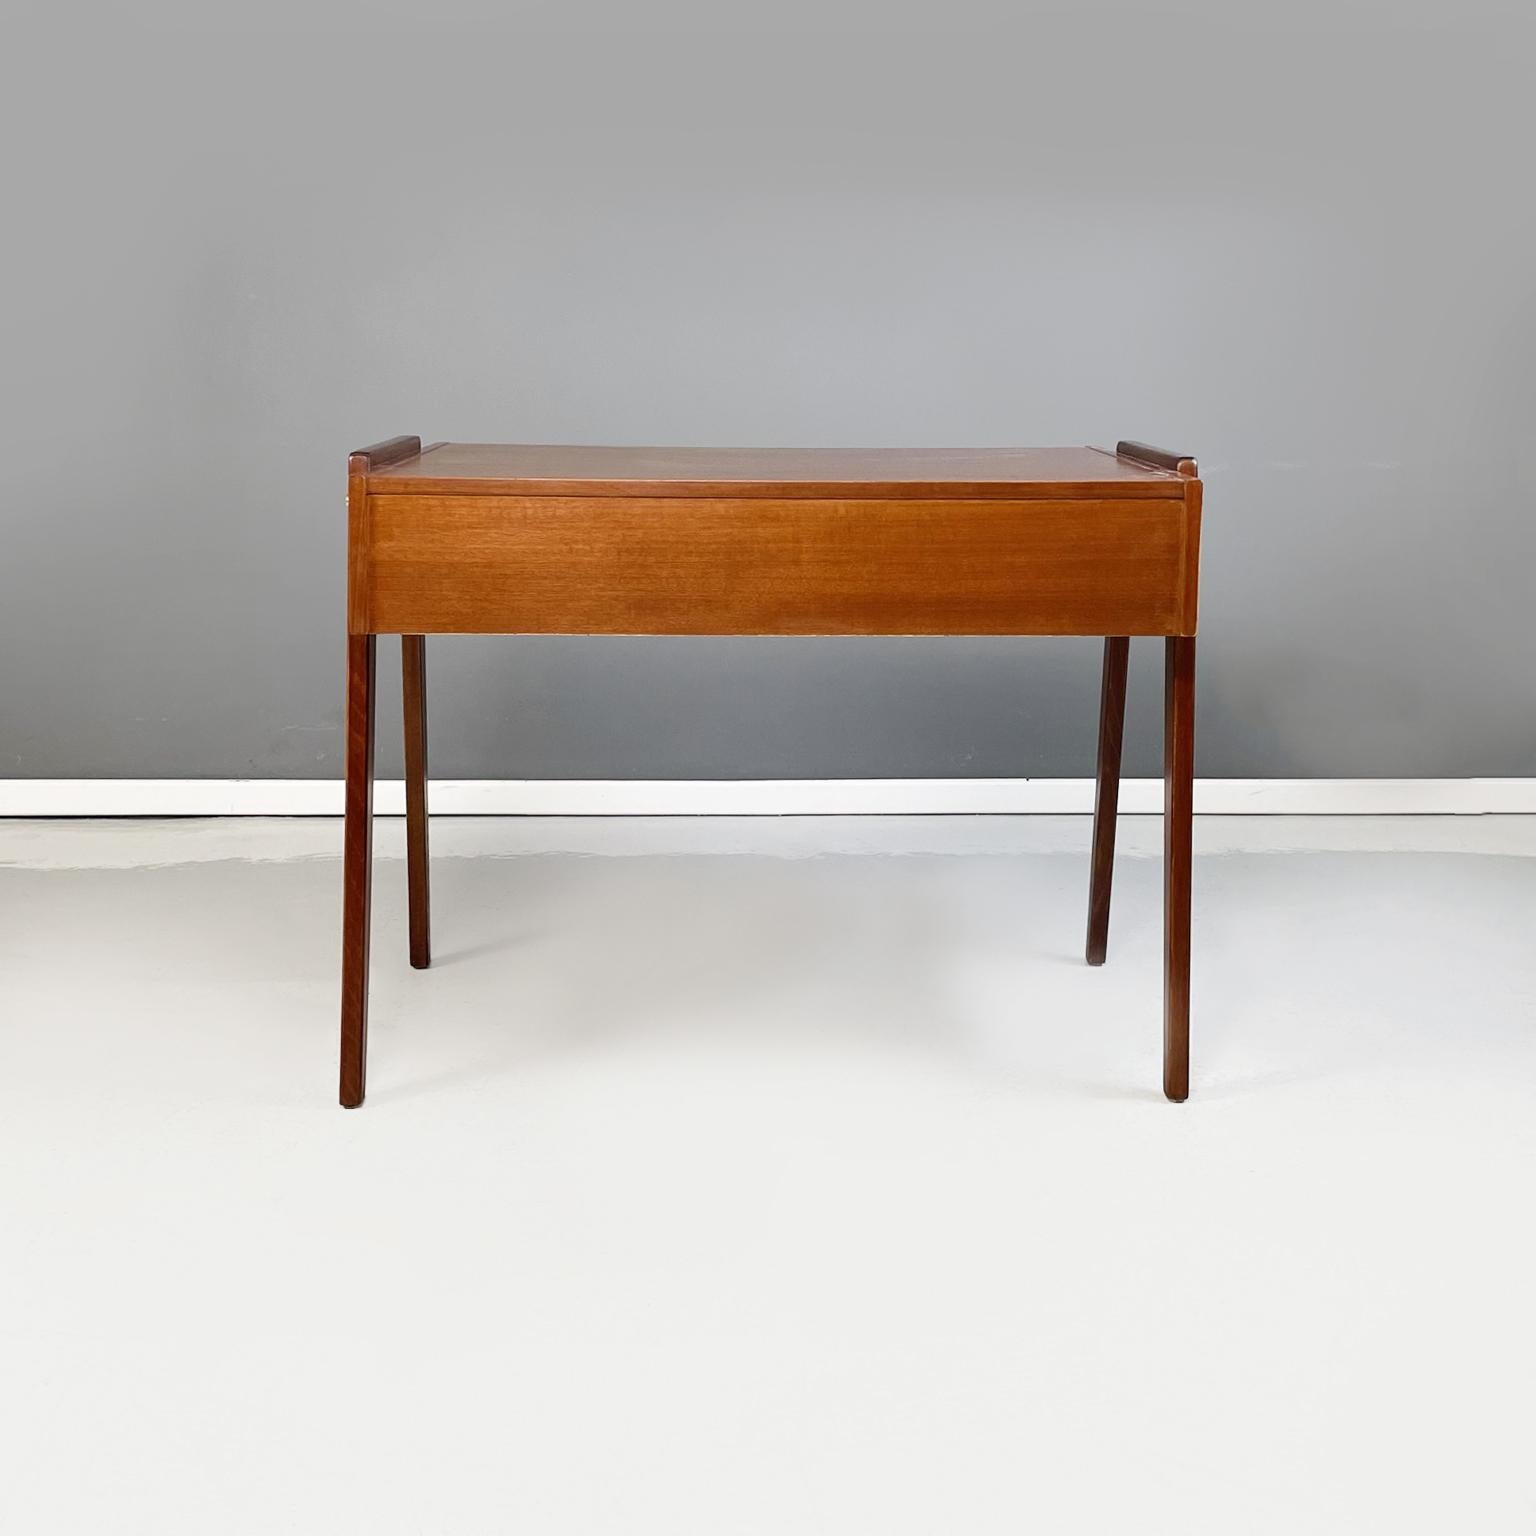 Mid-20th Century German Midcentury Wooden Desk with Drawers and Brass Details, circa 1960s